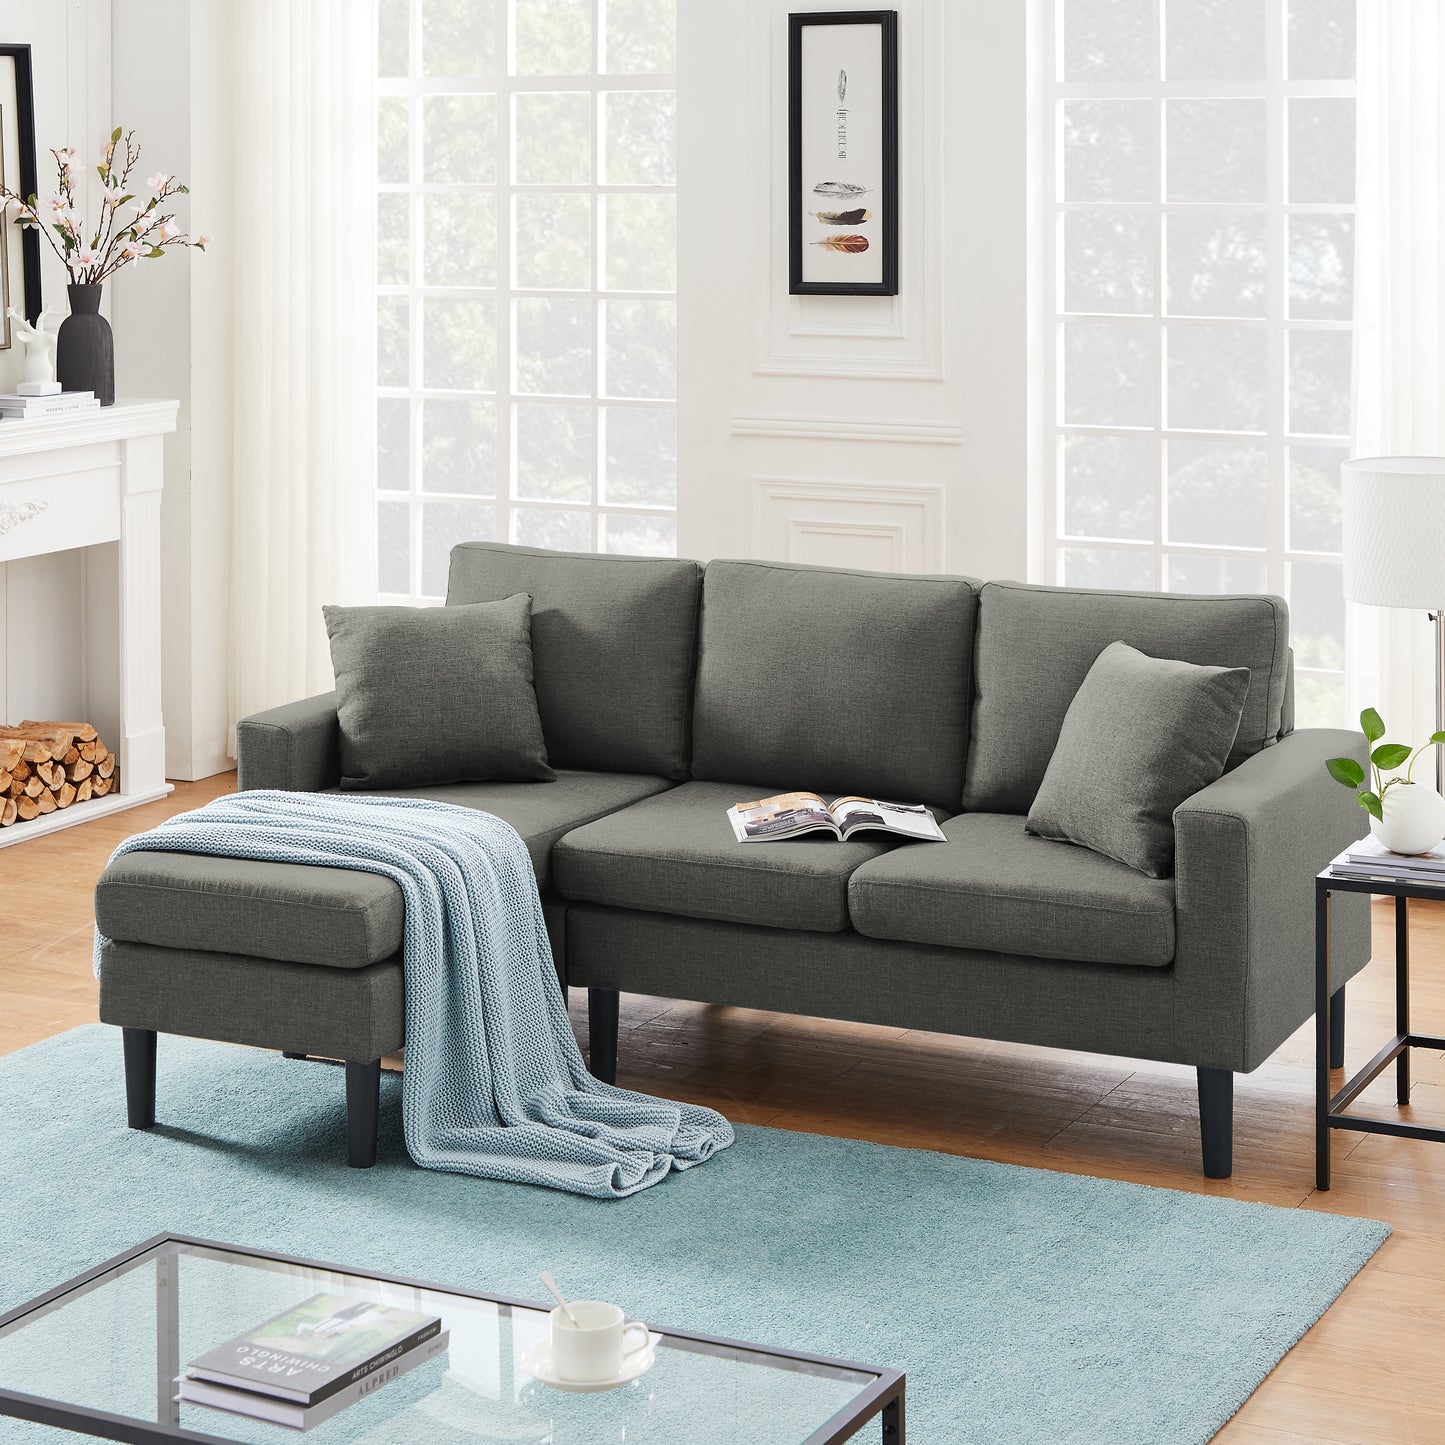 Reversible sectional sofa (Pick up only)